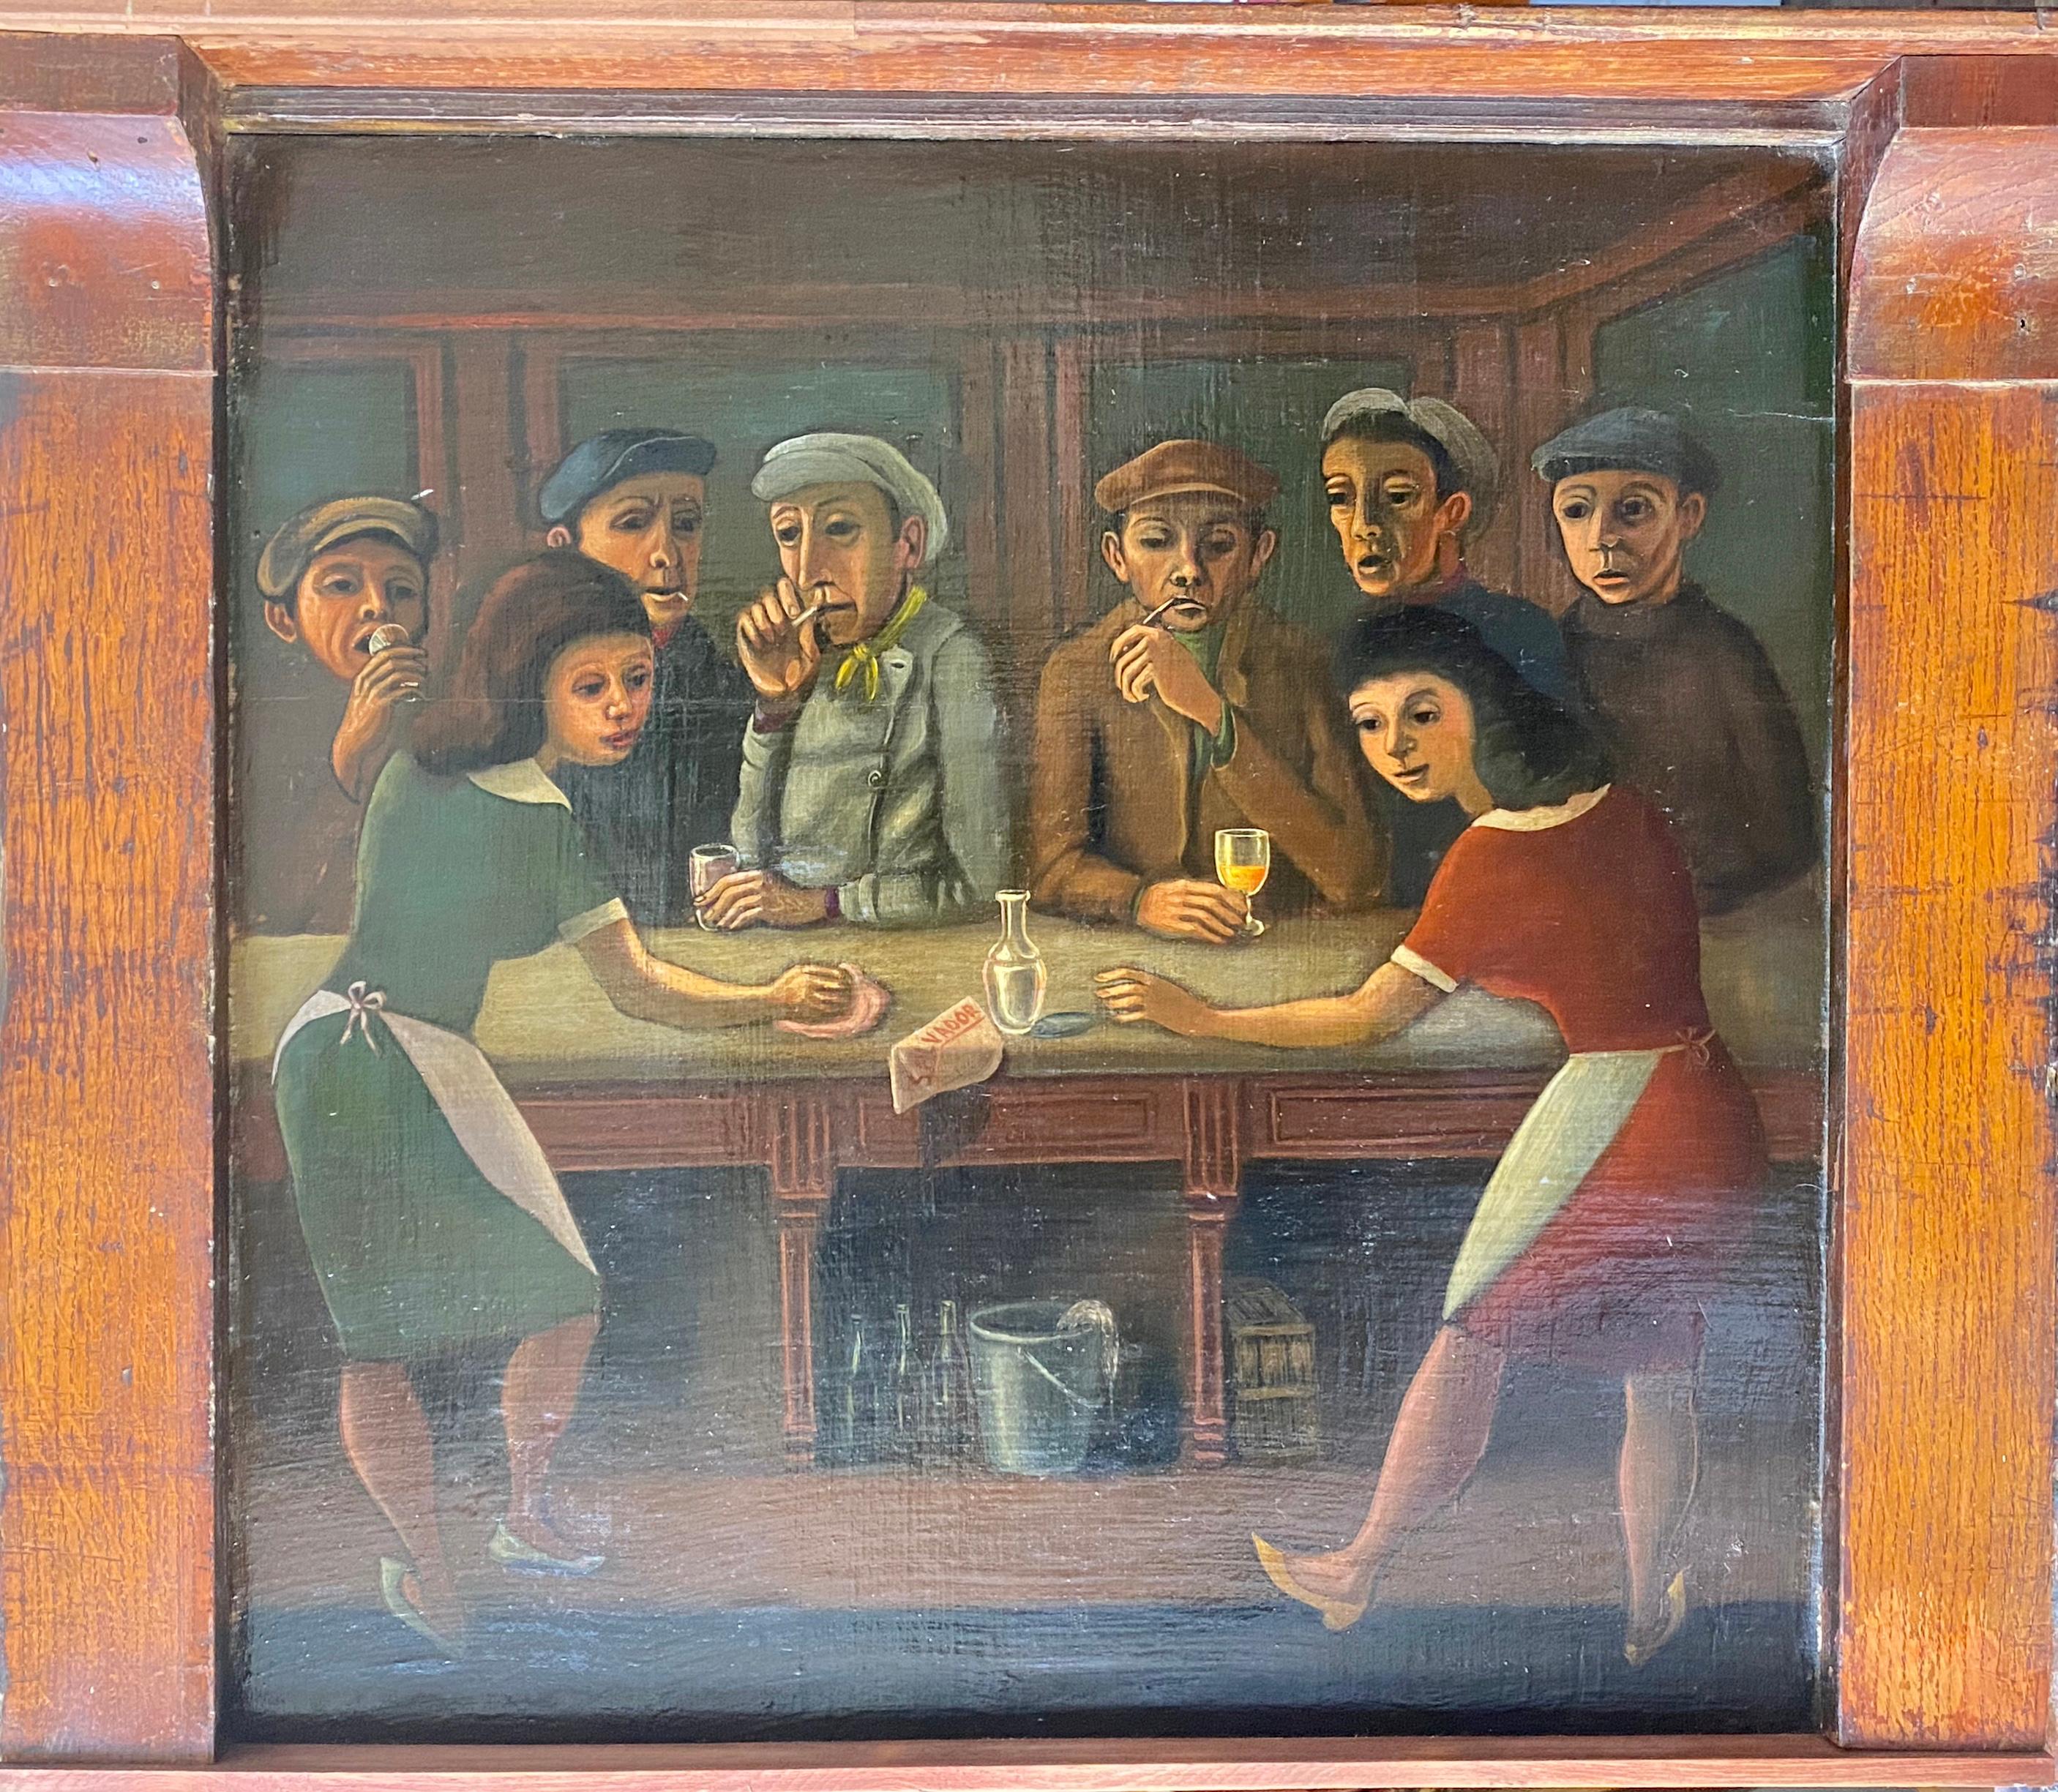 The bar: prohibition speakeasy era faux naif surrealist outsider painting - Painting by Carlos Palet Salvador